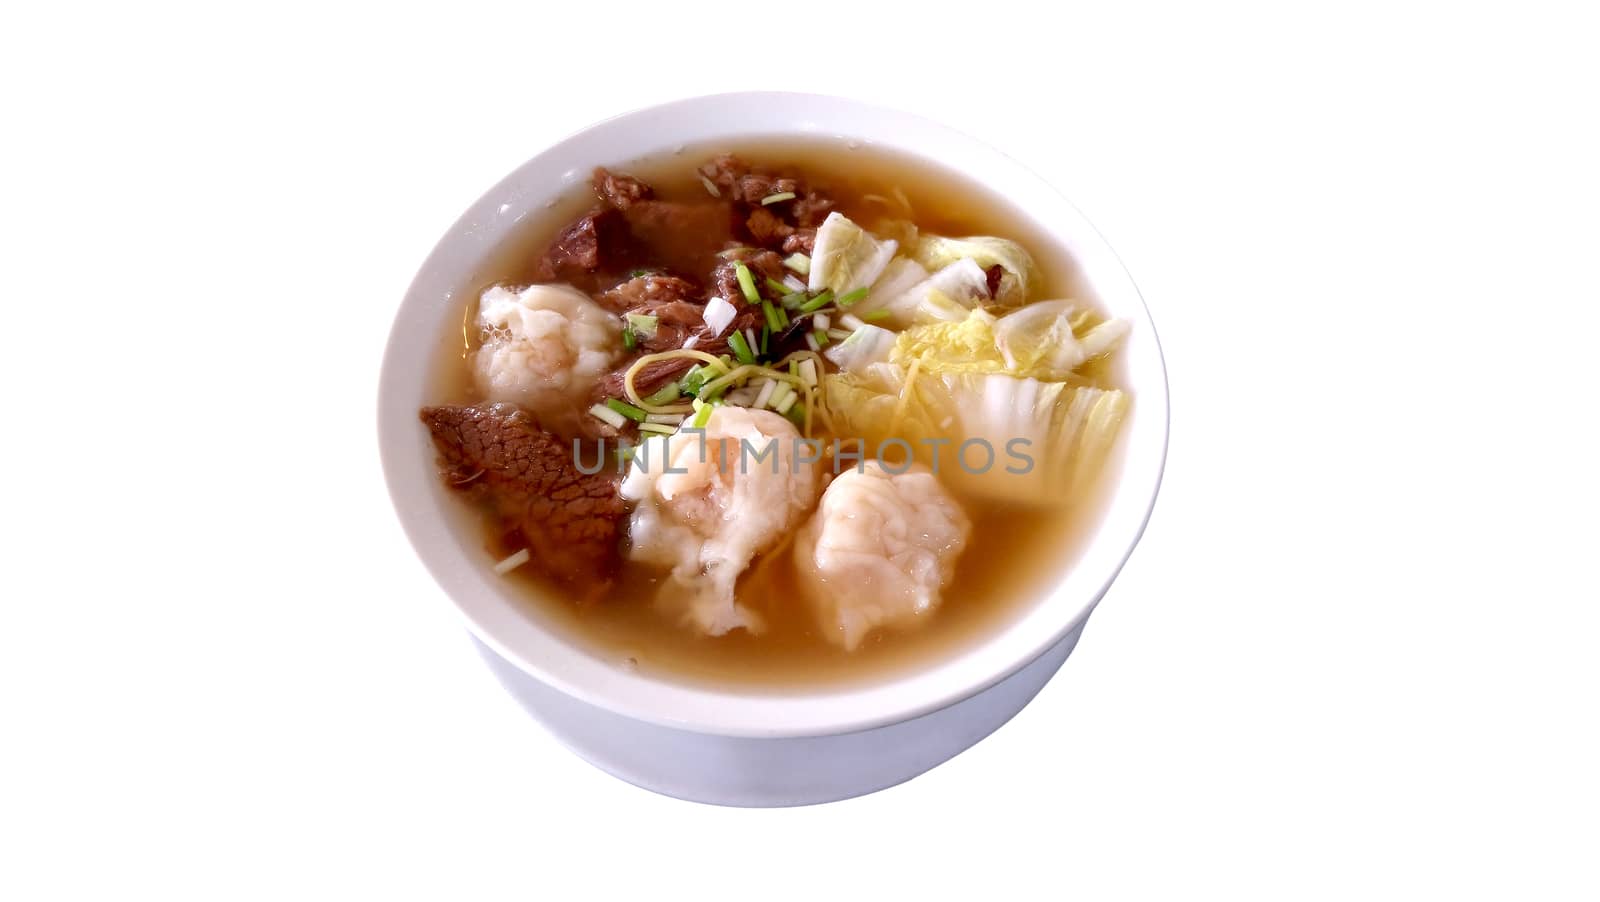 Chinese beef noodles and wanton soup by imwaltersy